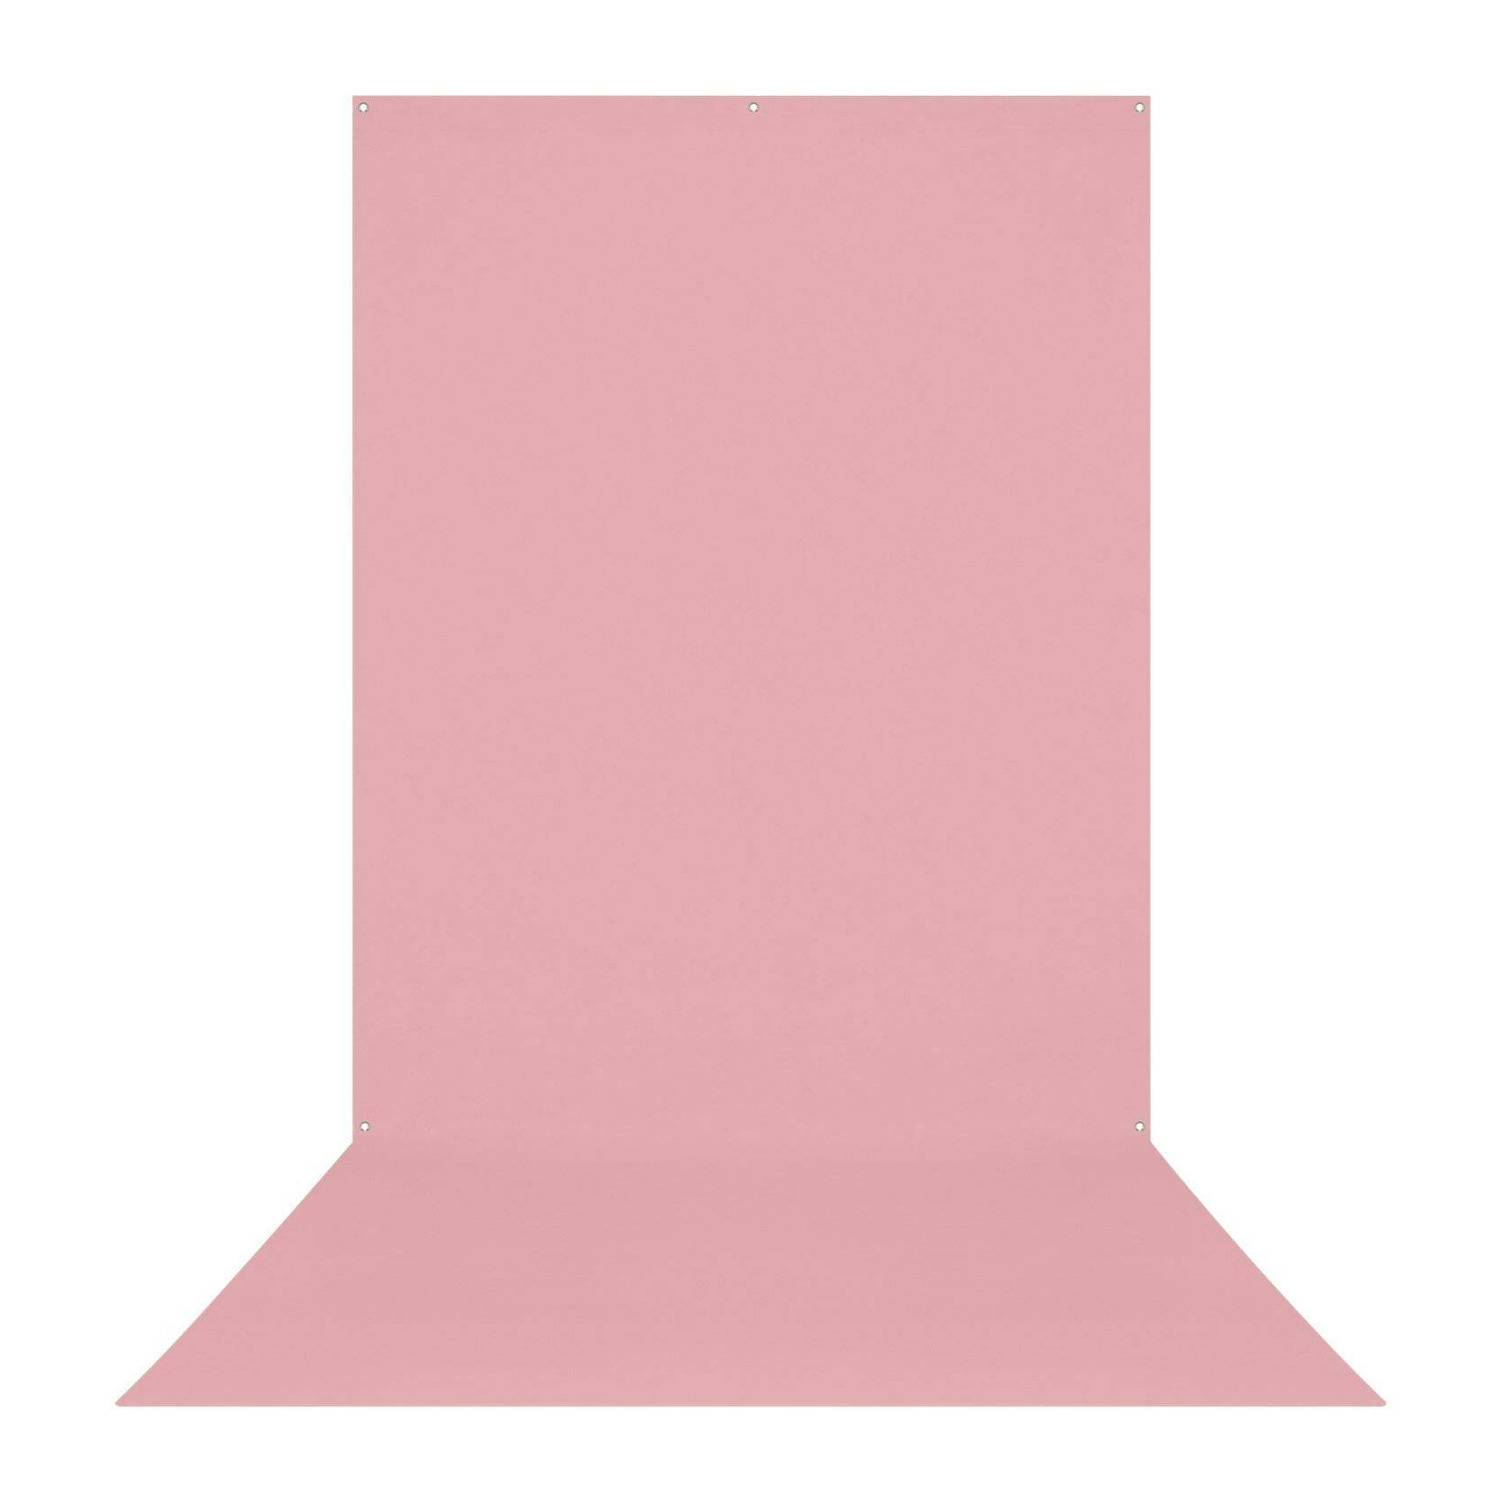 Westcott X-Drop Wrinkle-Resistant Backdrop, Perfect for Video Conferencing (Blush Pink, 5 x 12 Feet)